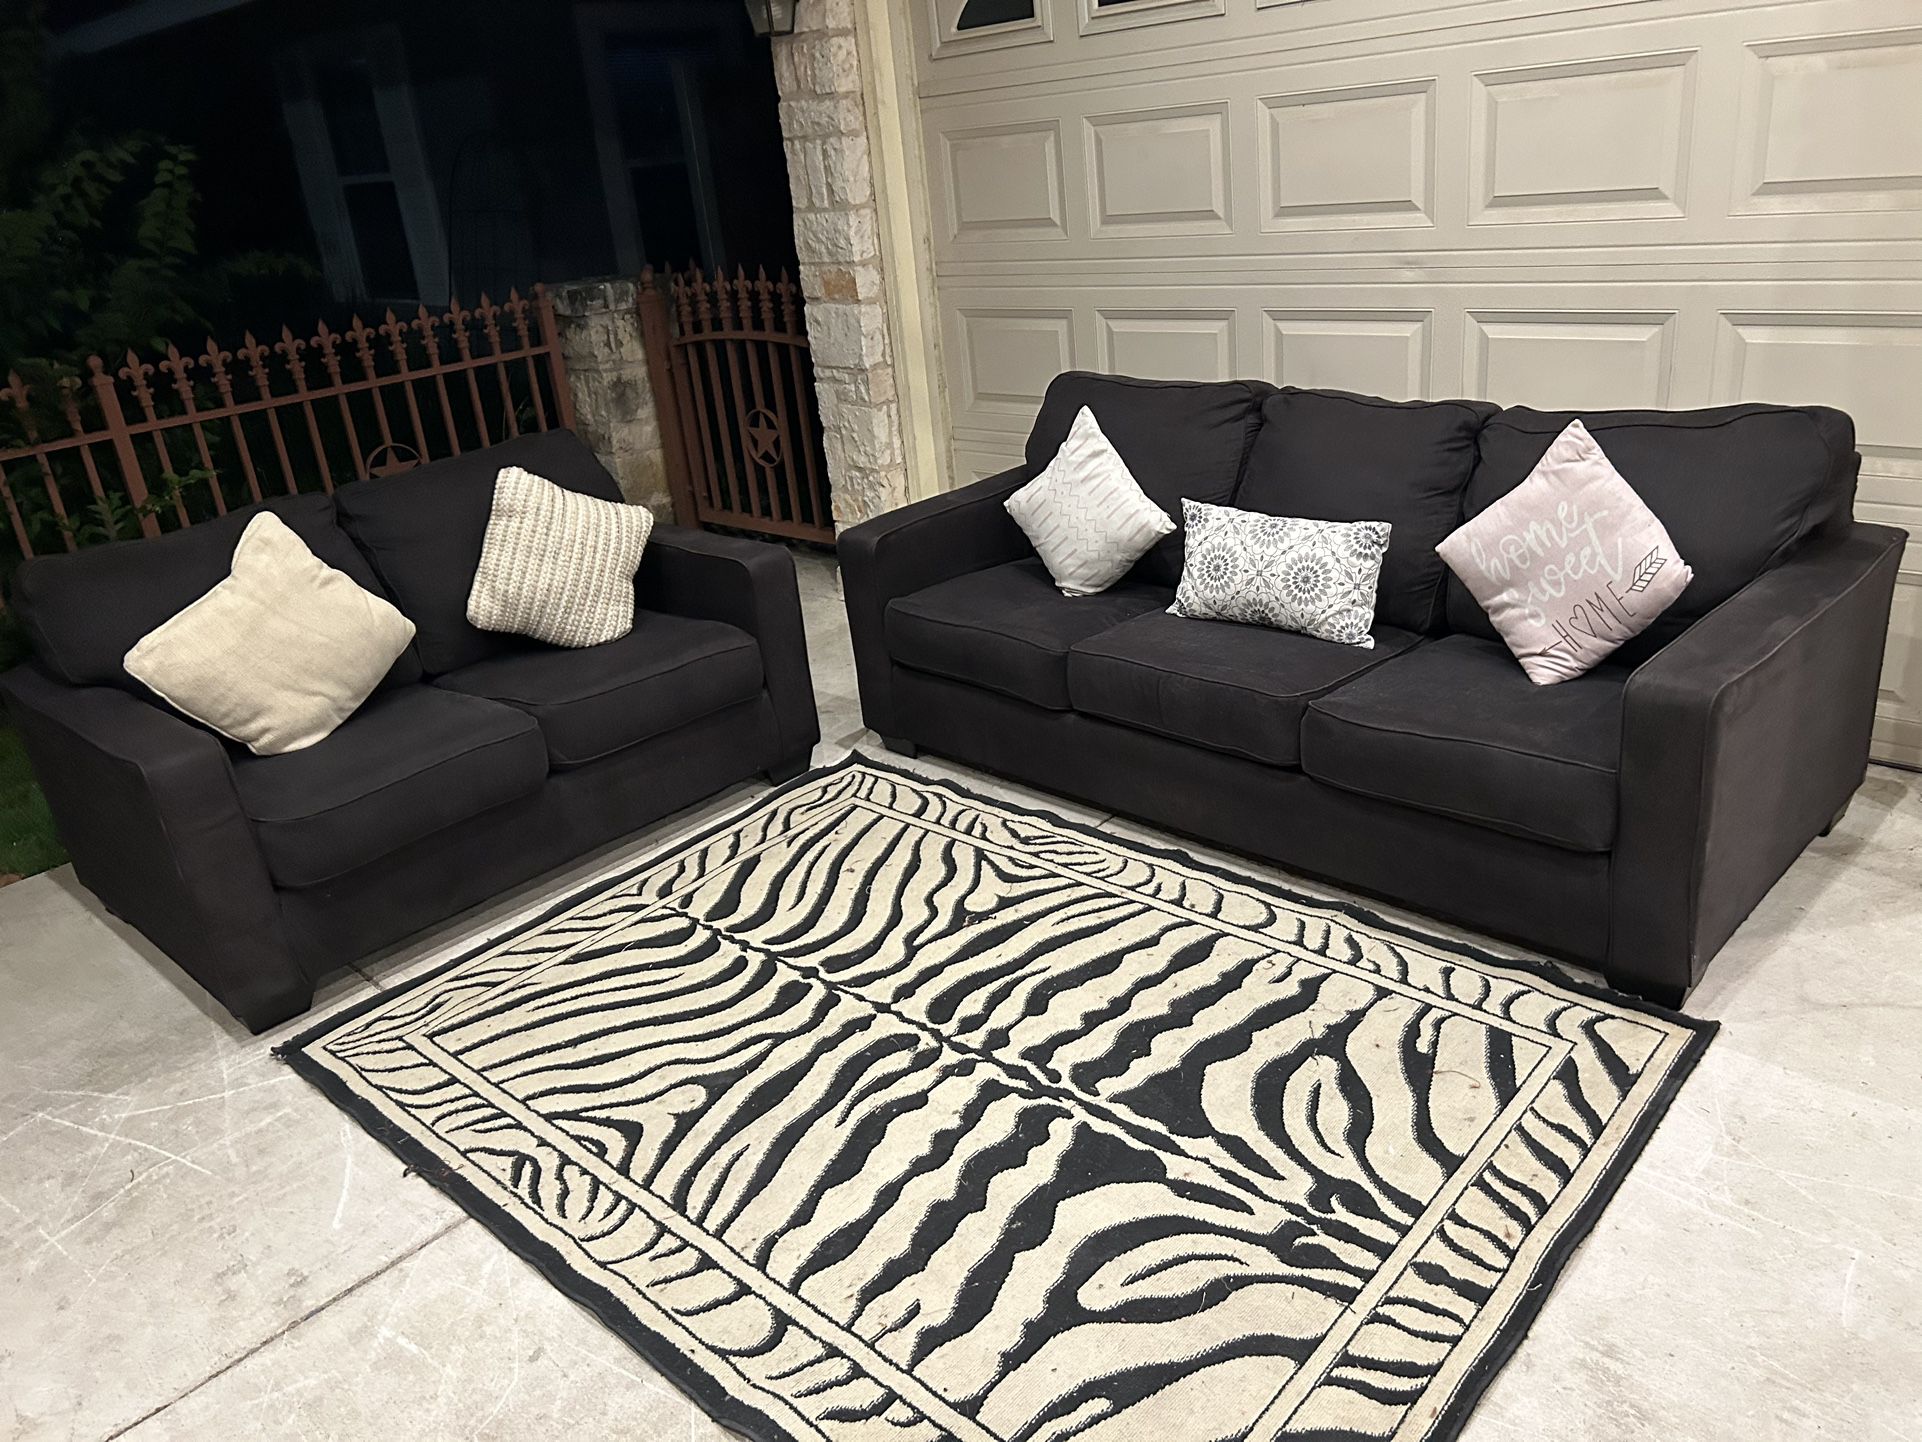 Free Delivery 🚚 Black Couch Set/ Sala Color Negra